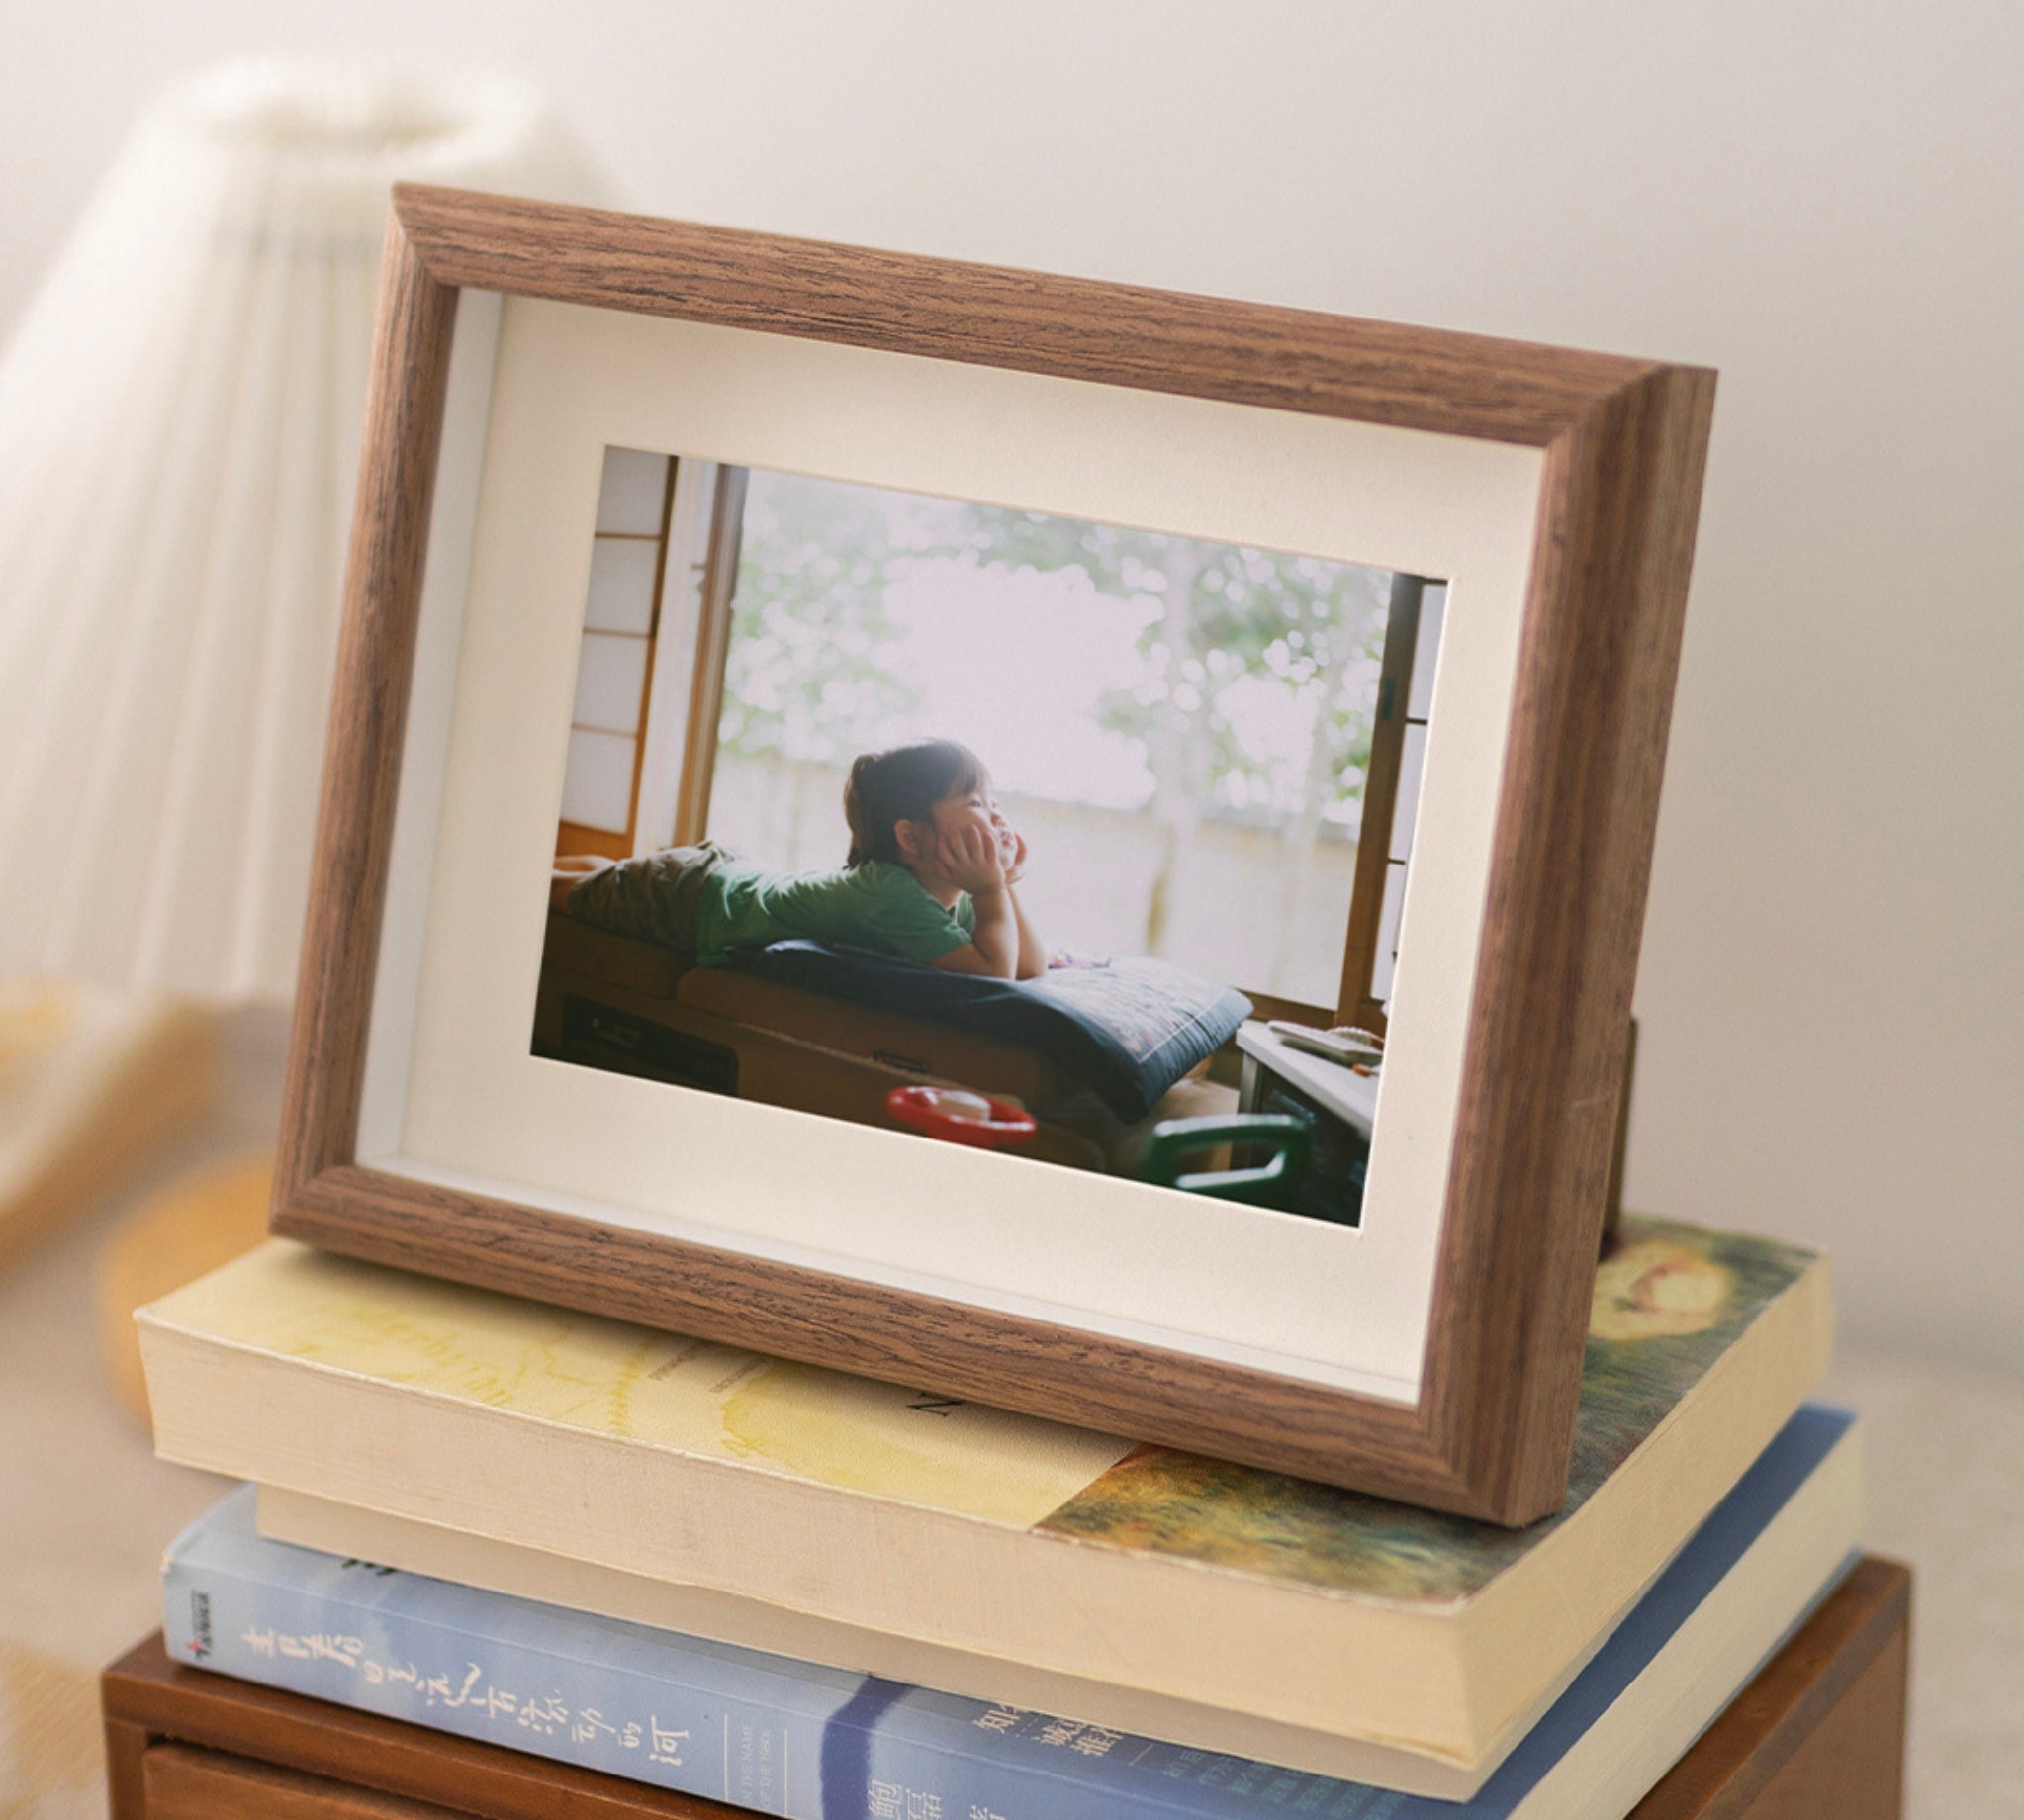 4x6 5x7 6x8 7x12 8x10 Wood Grain Picture Frame With Mat, Brown